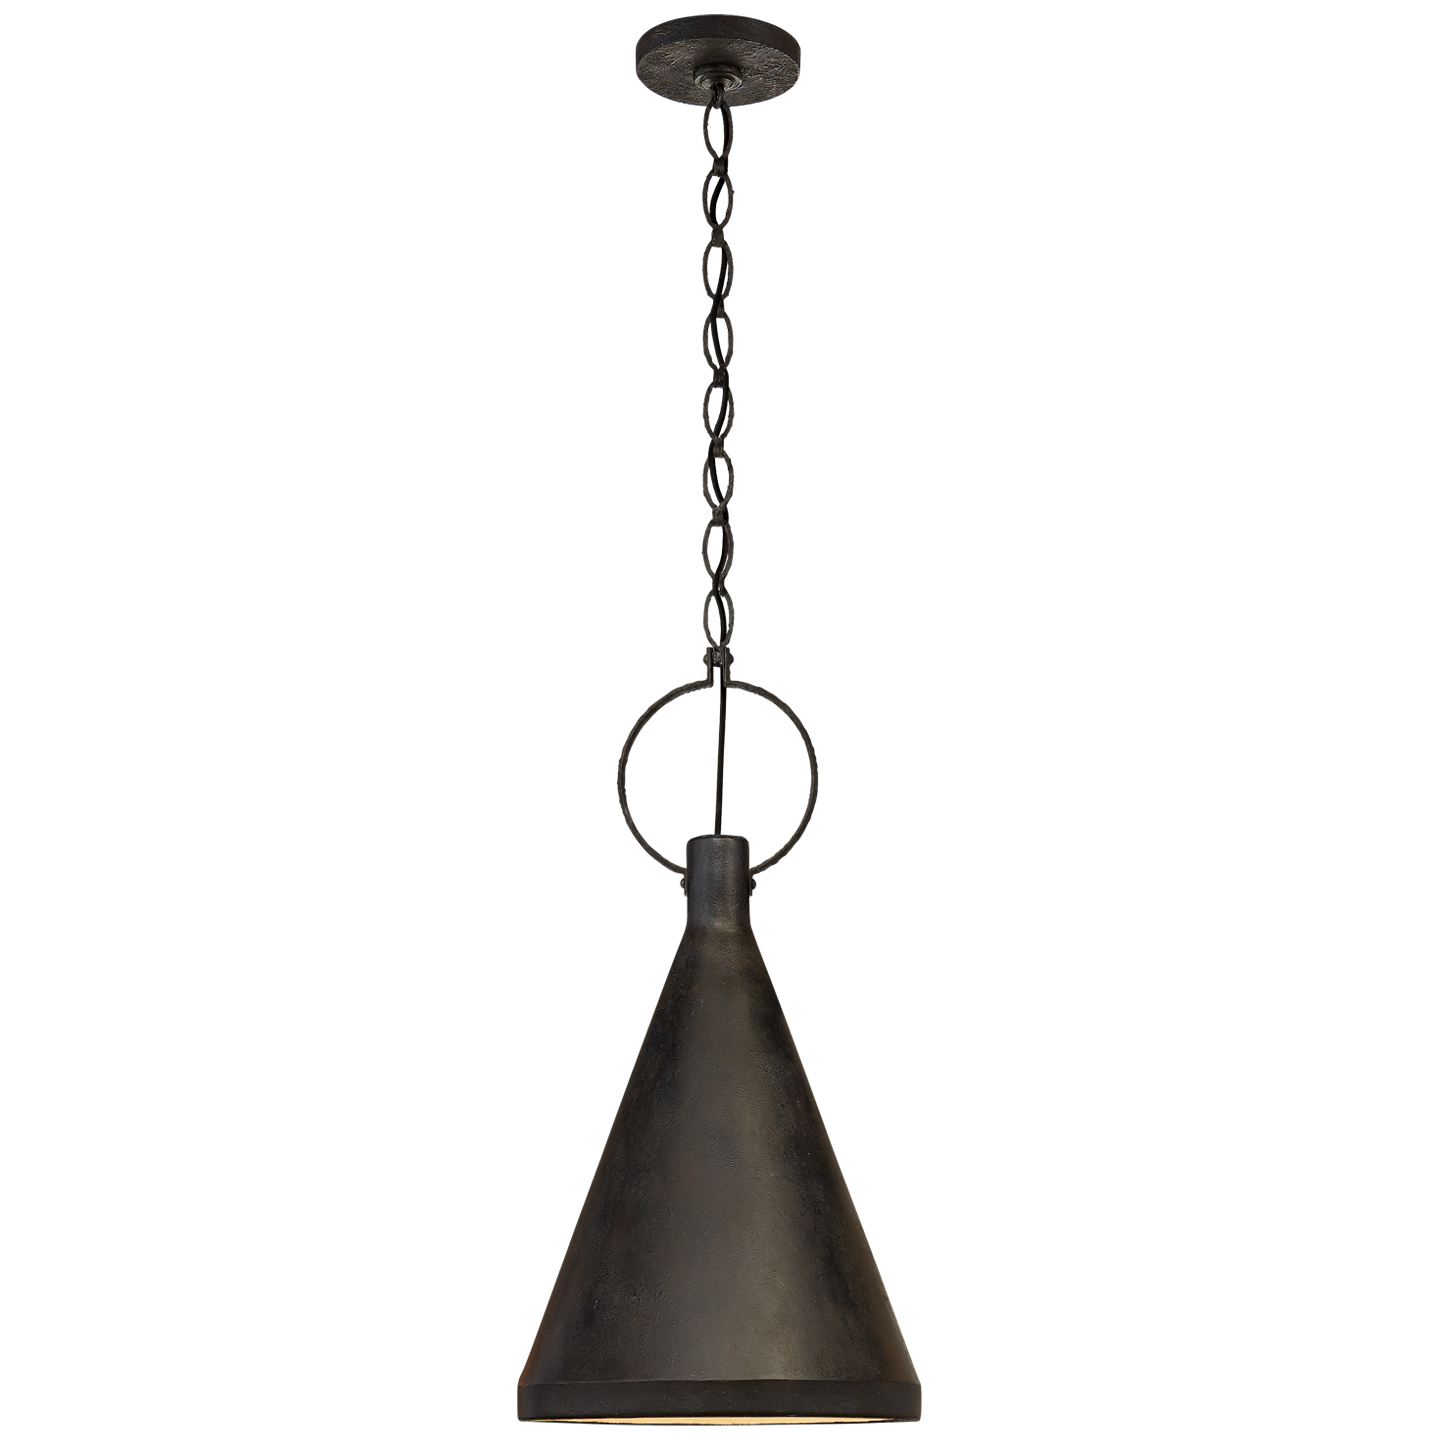 We love the finish on this Limoges Tall Pendant by Visual Comfort. This would look gorgeous over a kitchen island, kitchen sink, or other area needing extra light.   Designer: Suzanne Kasler   Height: 25.75" Width: 13.5" Canopy: 5.5" Round Socket: E26 Keyless Wattage: 60 A19 Weight: 6 Pounds